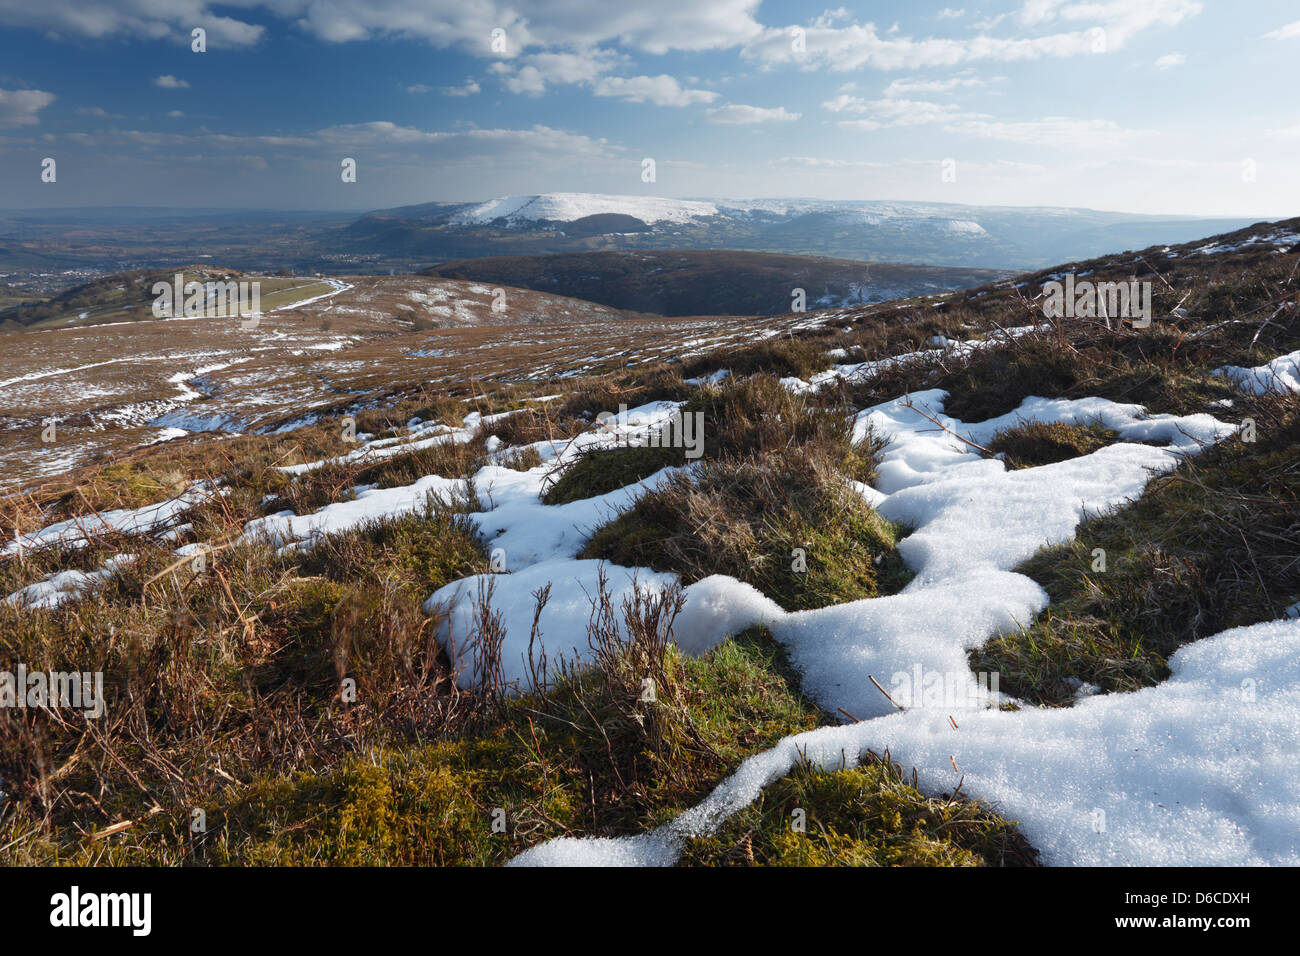 Patches of snow melting on the slopes of Sugar Loaf mountain. Near Abergavenny. Brecon Beacons National Park. Wales, UK. Stock Photo